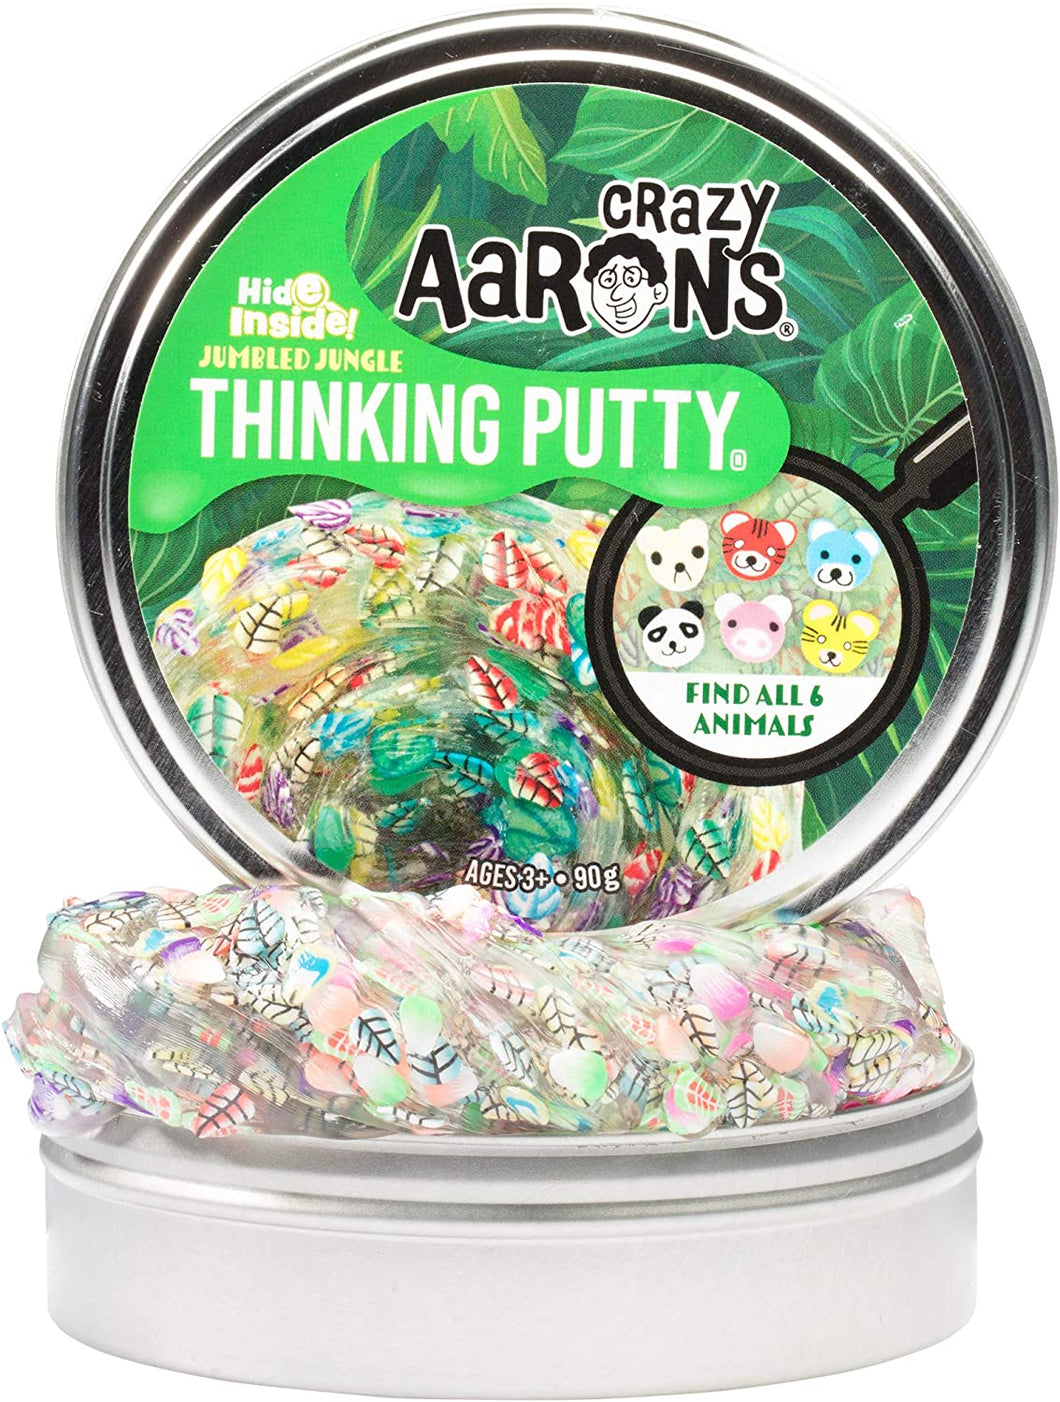 Crazy Aaron's - Jumbled Jungle Find It Putty Game